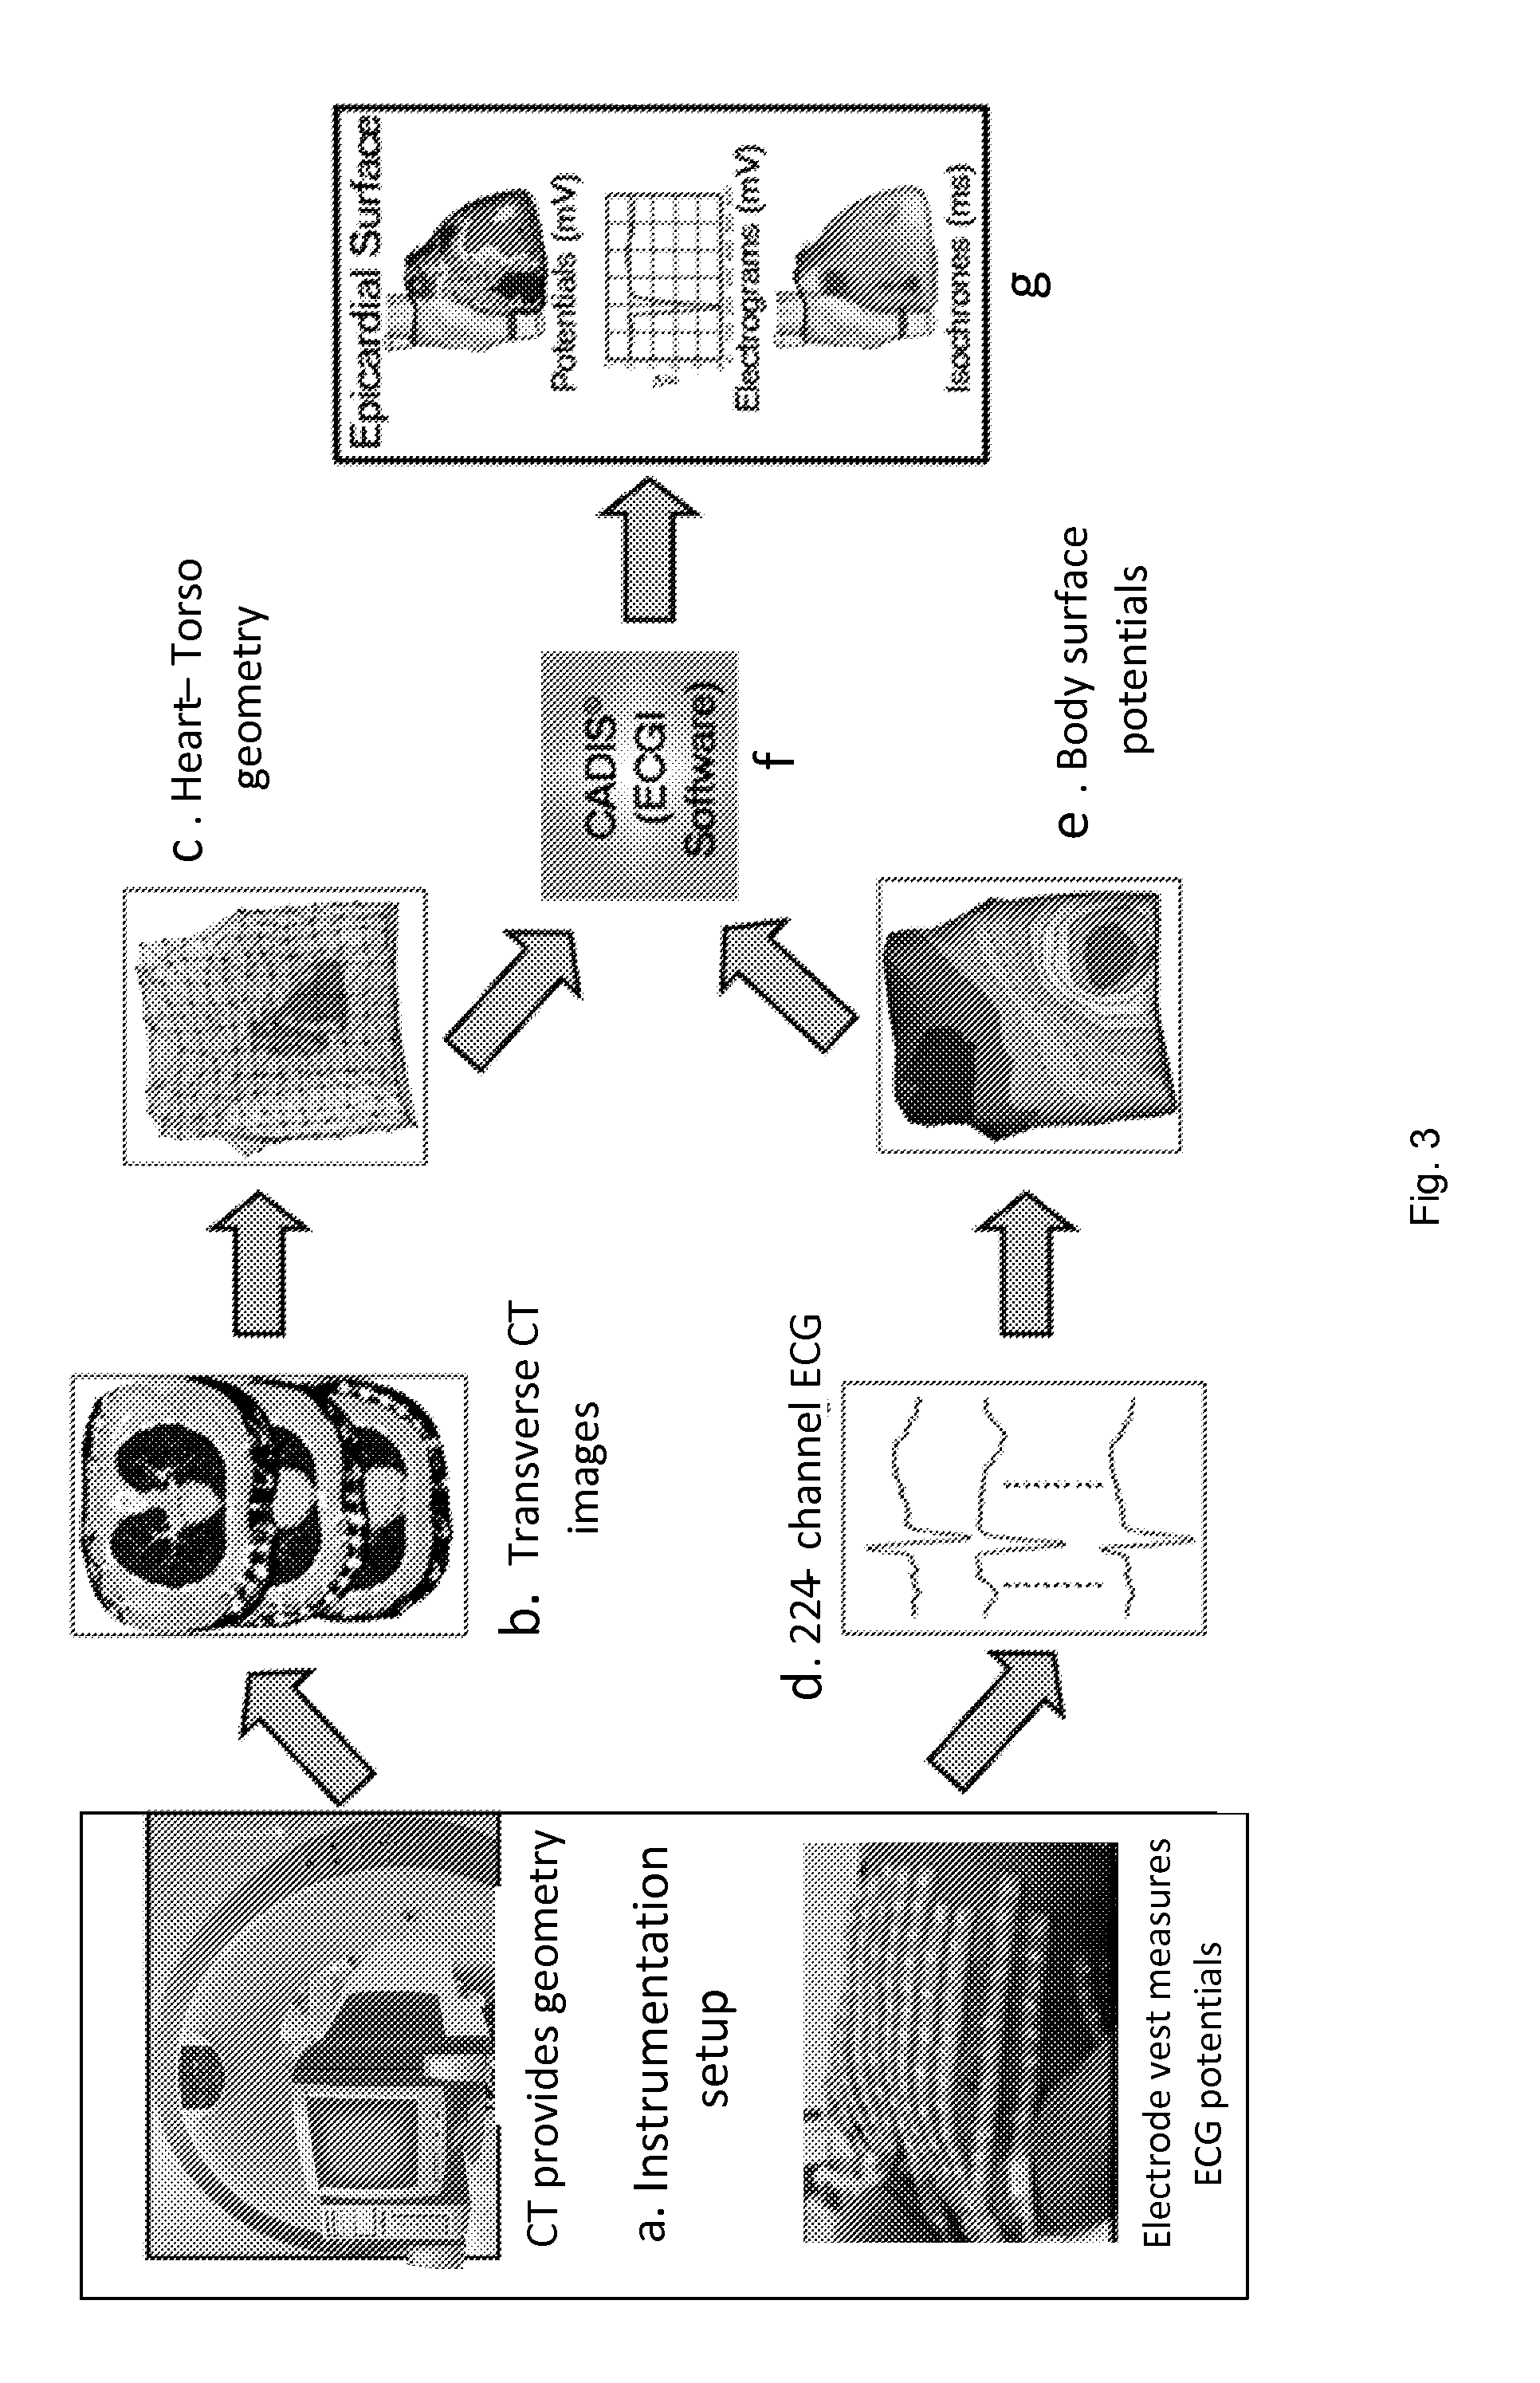 System and method for noninvasive electrocardiographic imaging (ECGI)